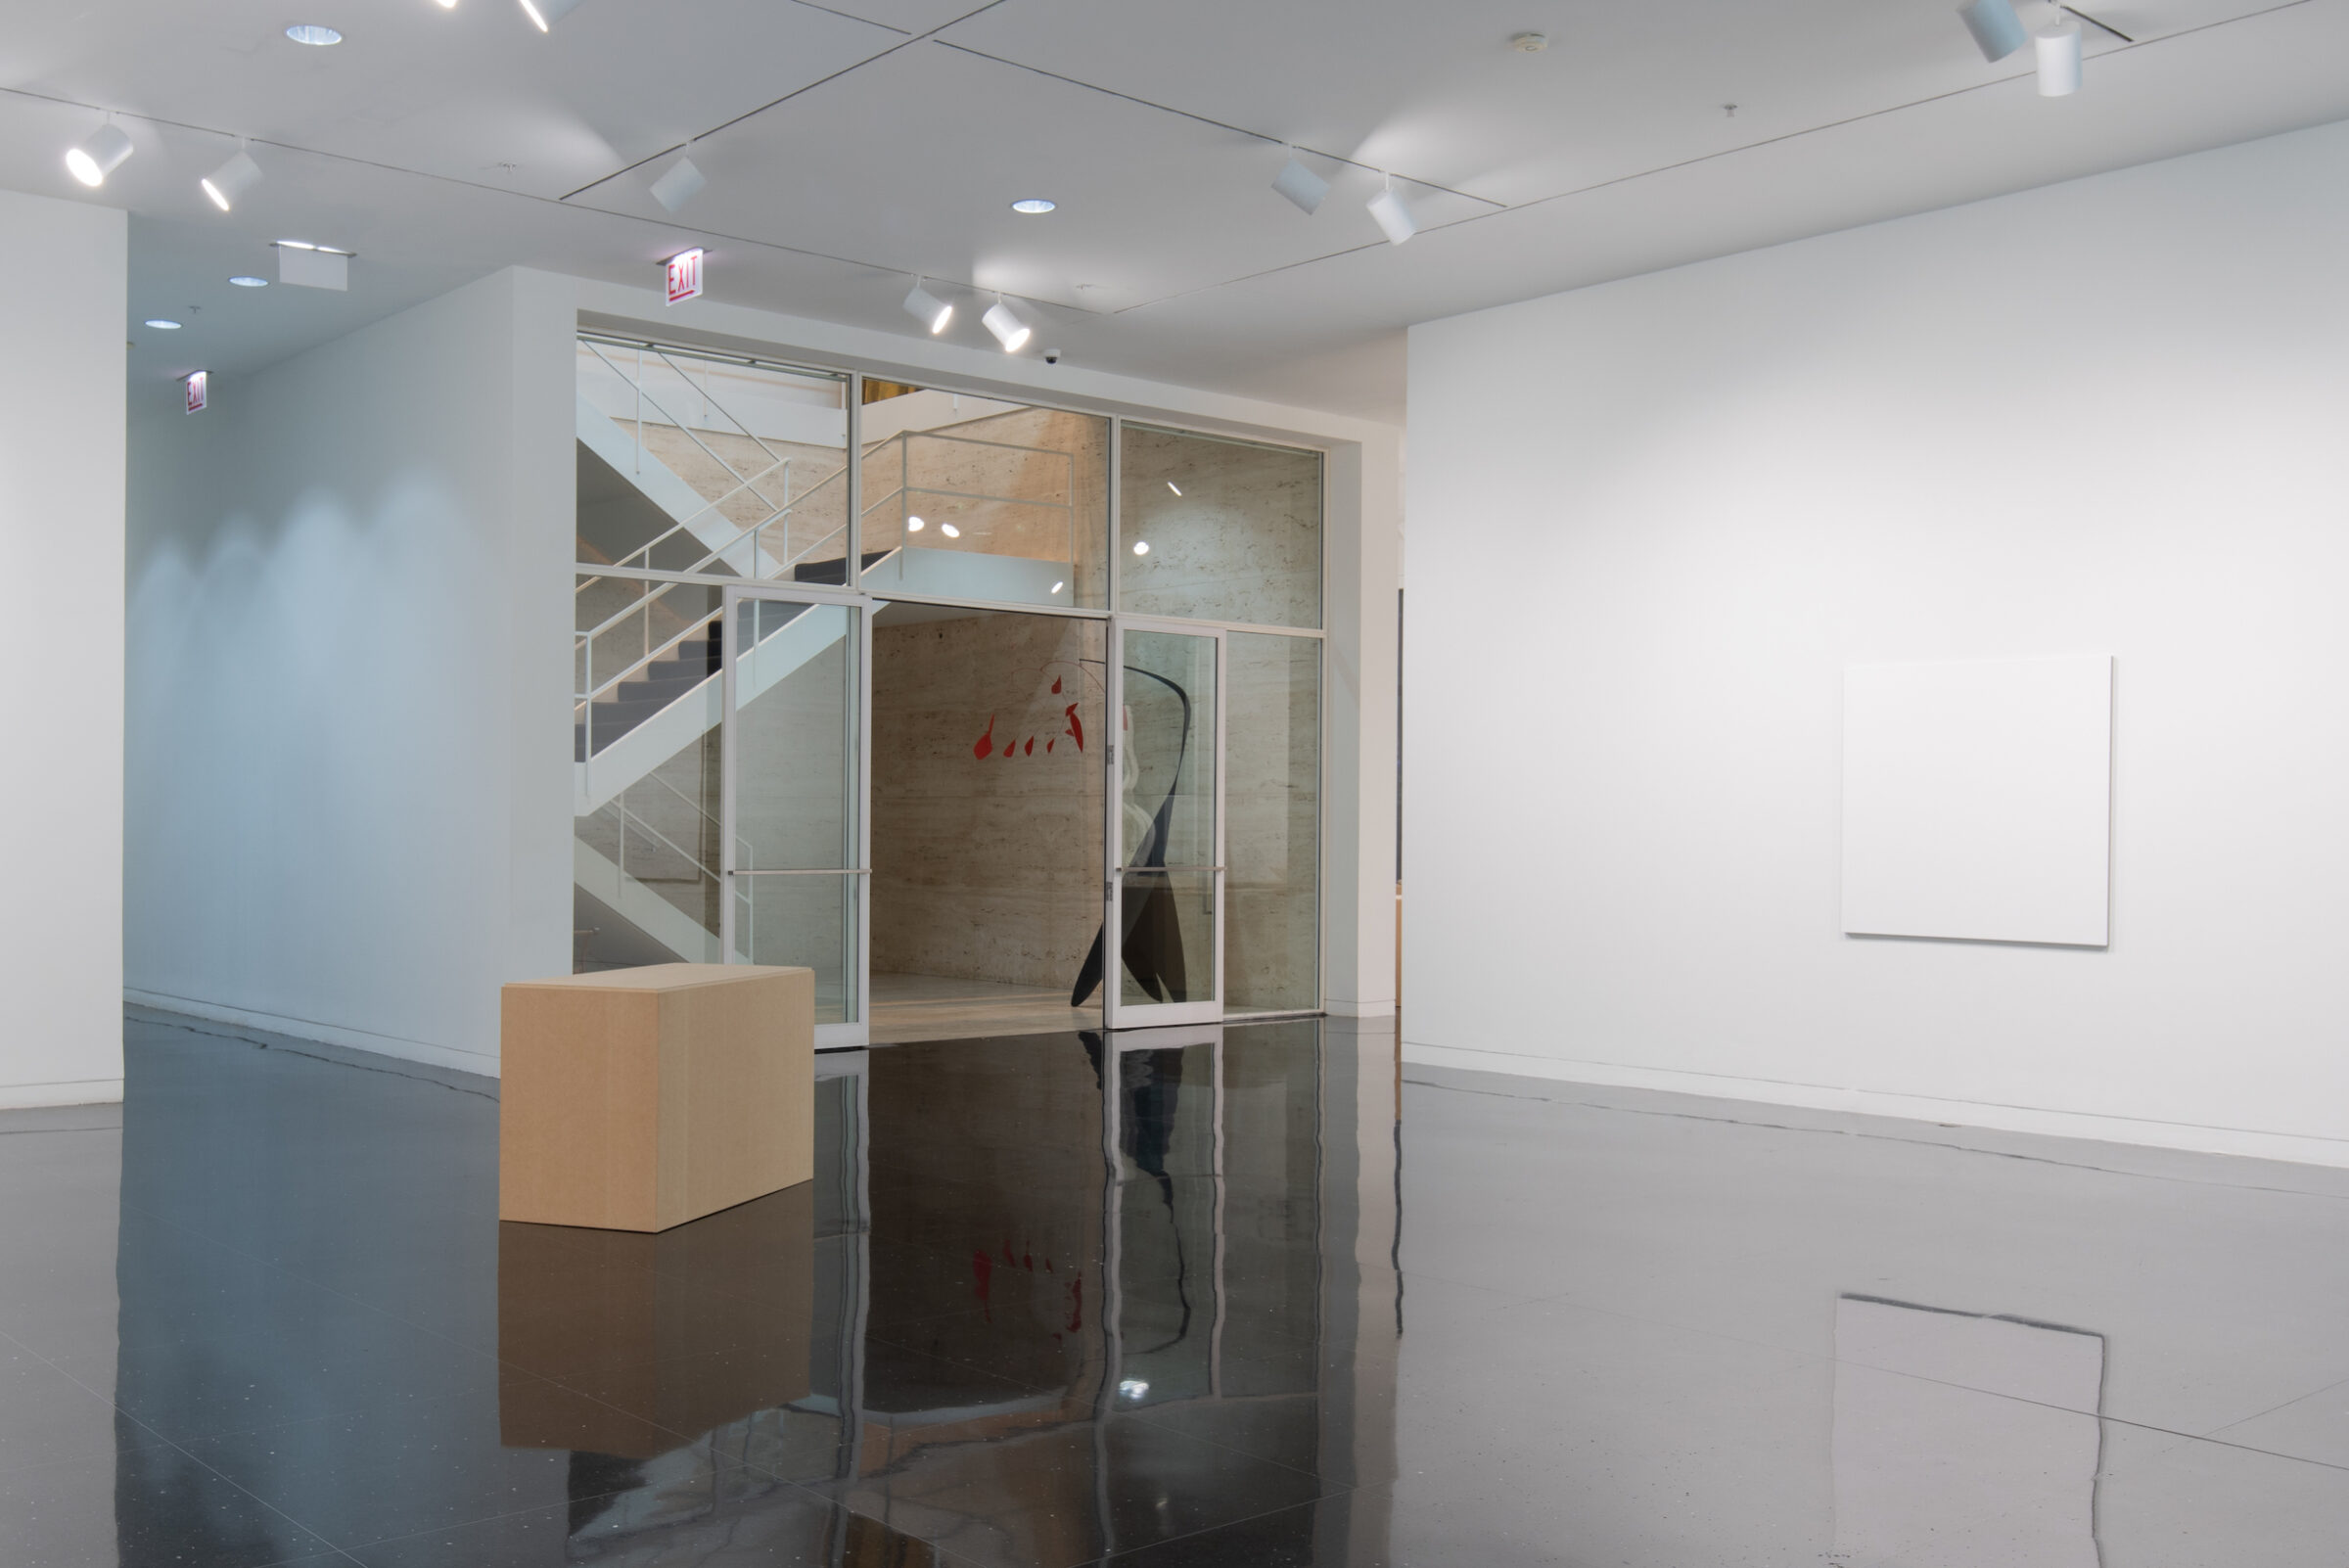 A white walled gallery with one pure white square canvas installed on a freestanding wall of identical color and one pedestal resembling a cardboard box. In the center of these two works, the Mies van der Rohe stairwell is visible.